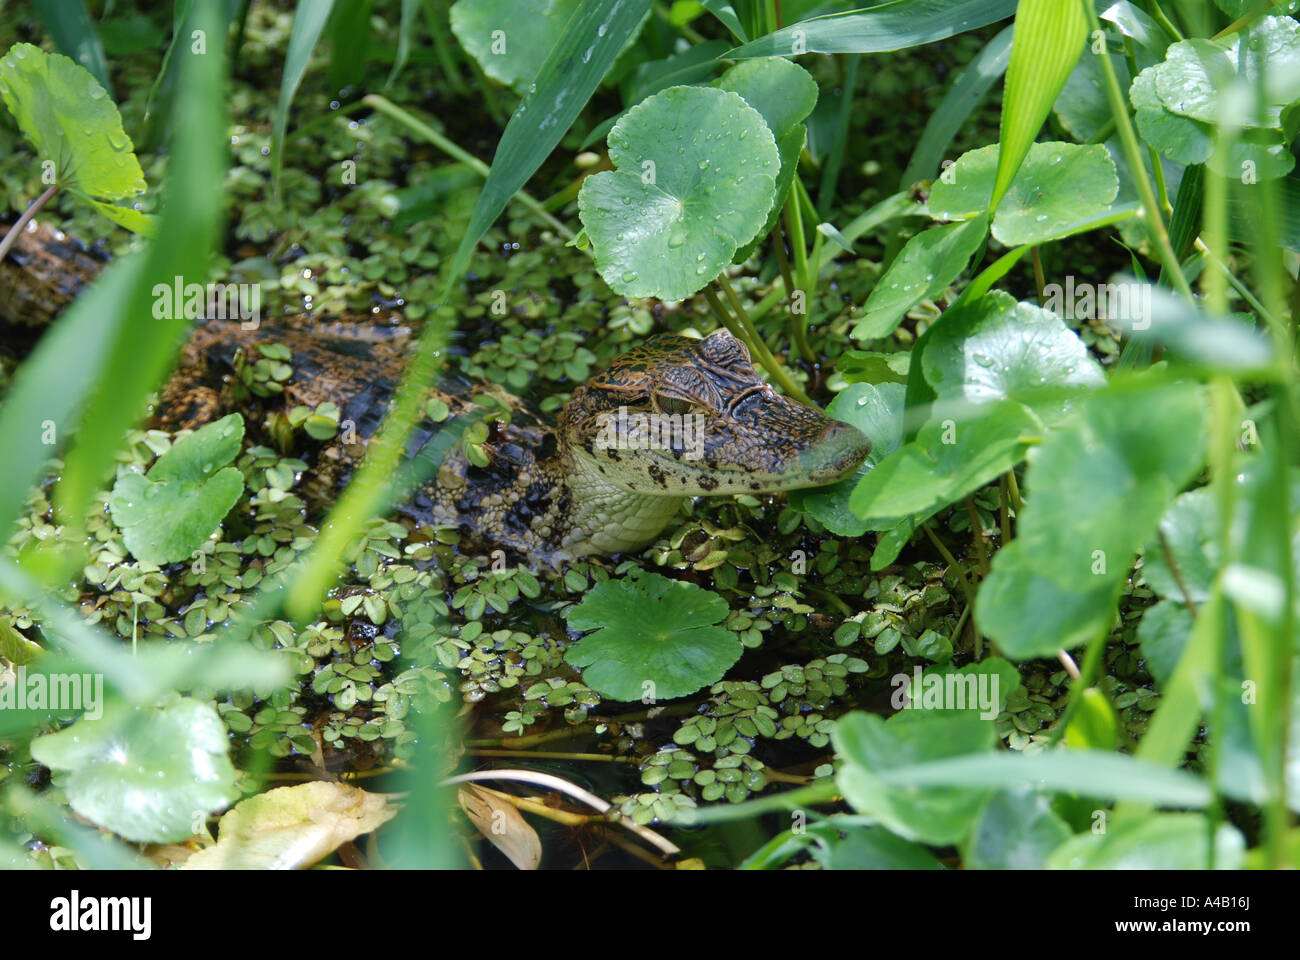 Young baby Spectacled Caiman Caiman crocodilus hinding in waterplants Tortuguero National Park Caribbean cost Costa Rica Stock Photo